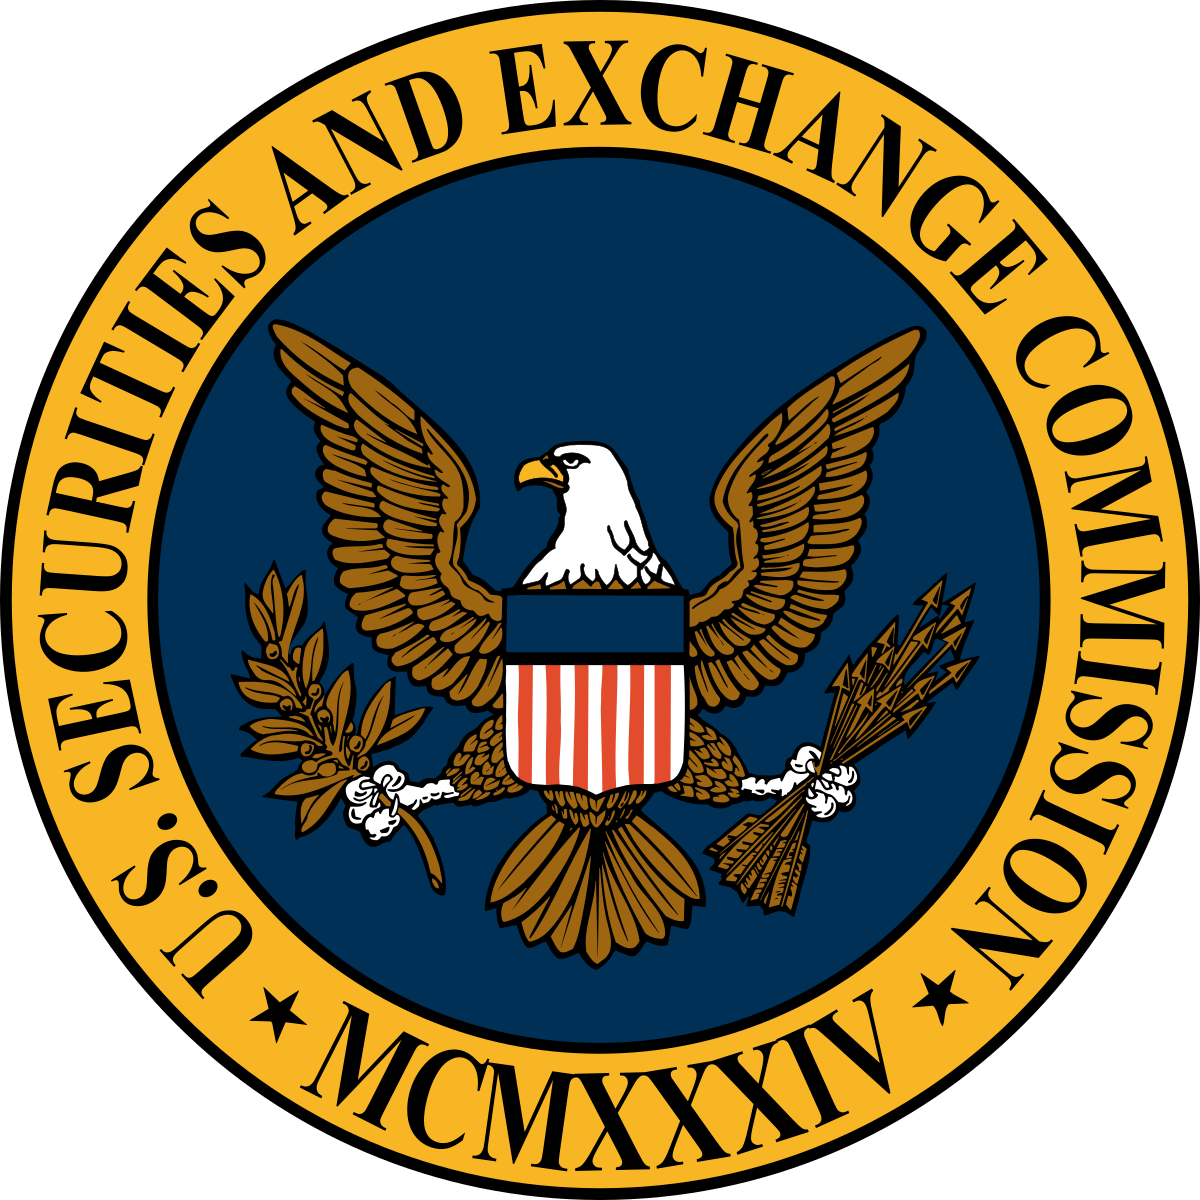 On May 12, 2021, a view of the U.S. Securities and Exchange Commission's (SEC) headquarters in Washington, D.C.